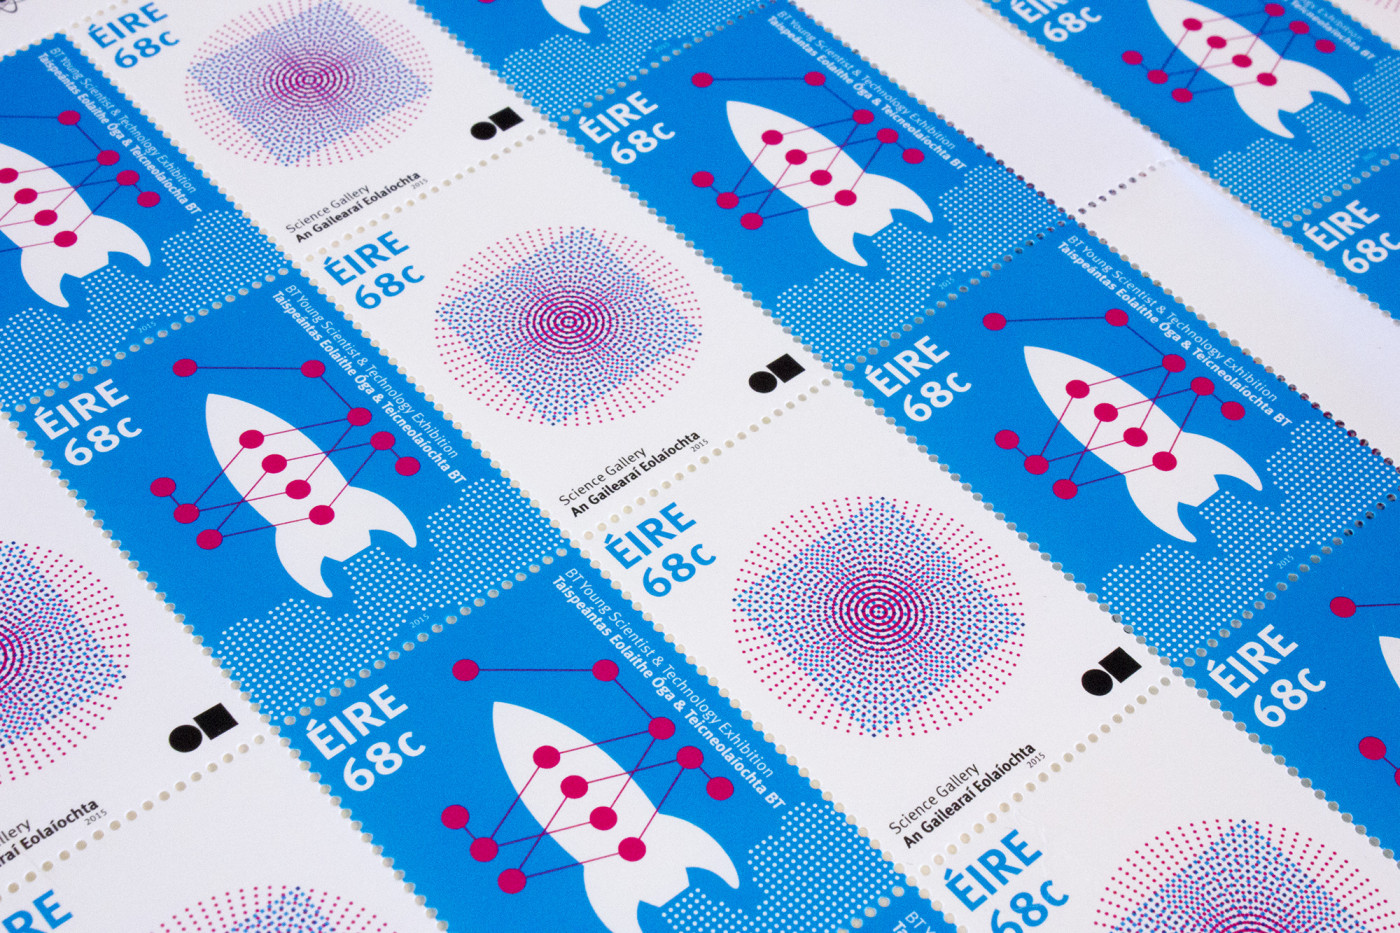 Science Stamps_designed by Detail_selected by the 100 Archive